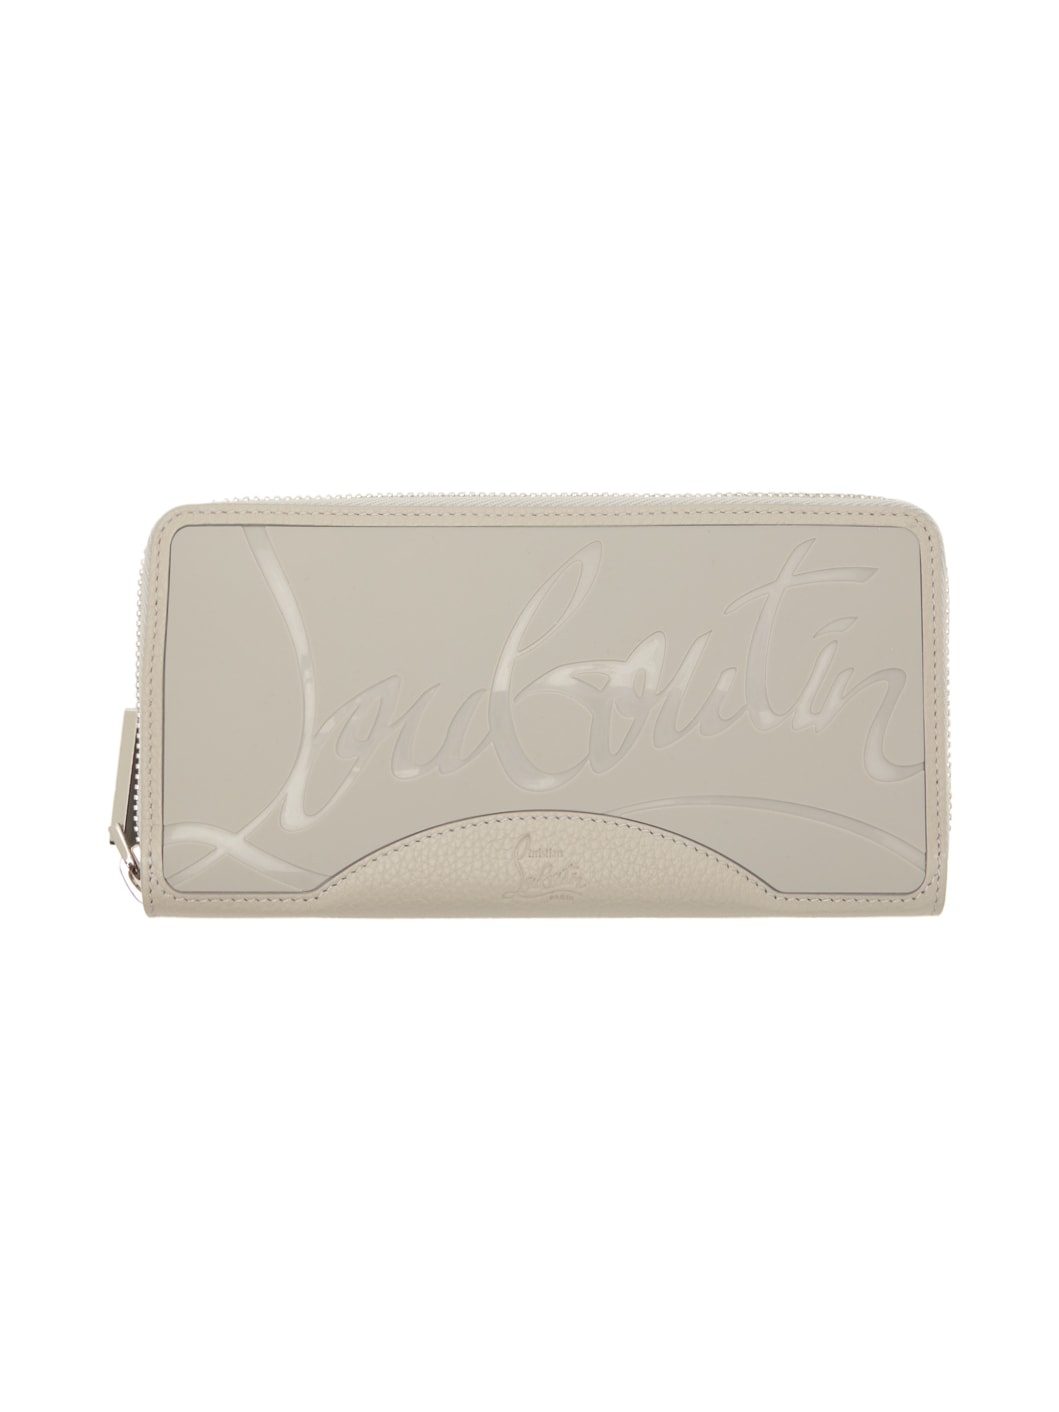 Gray Panettone Wallet - 1